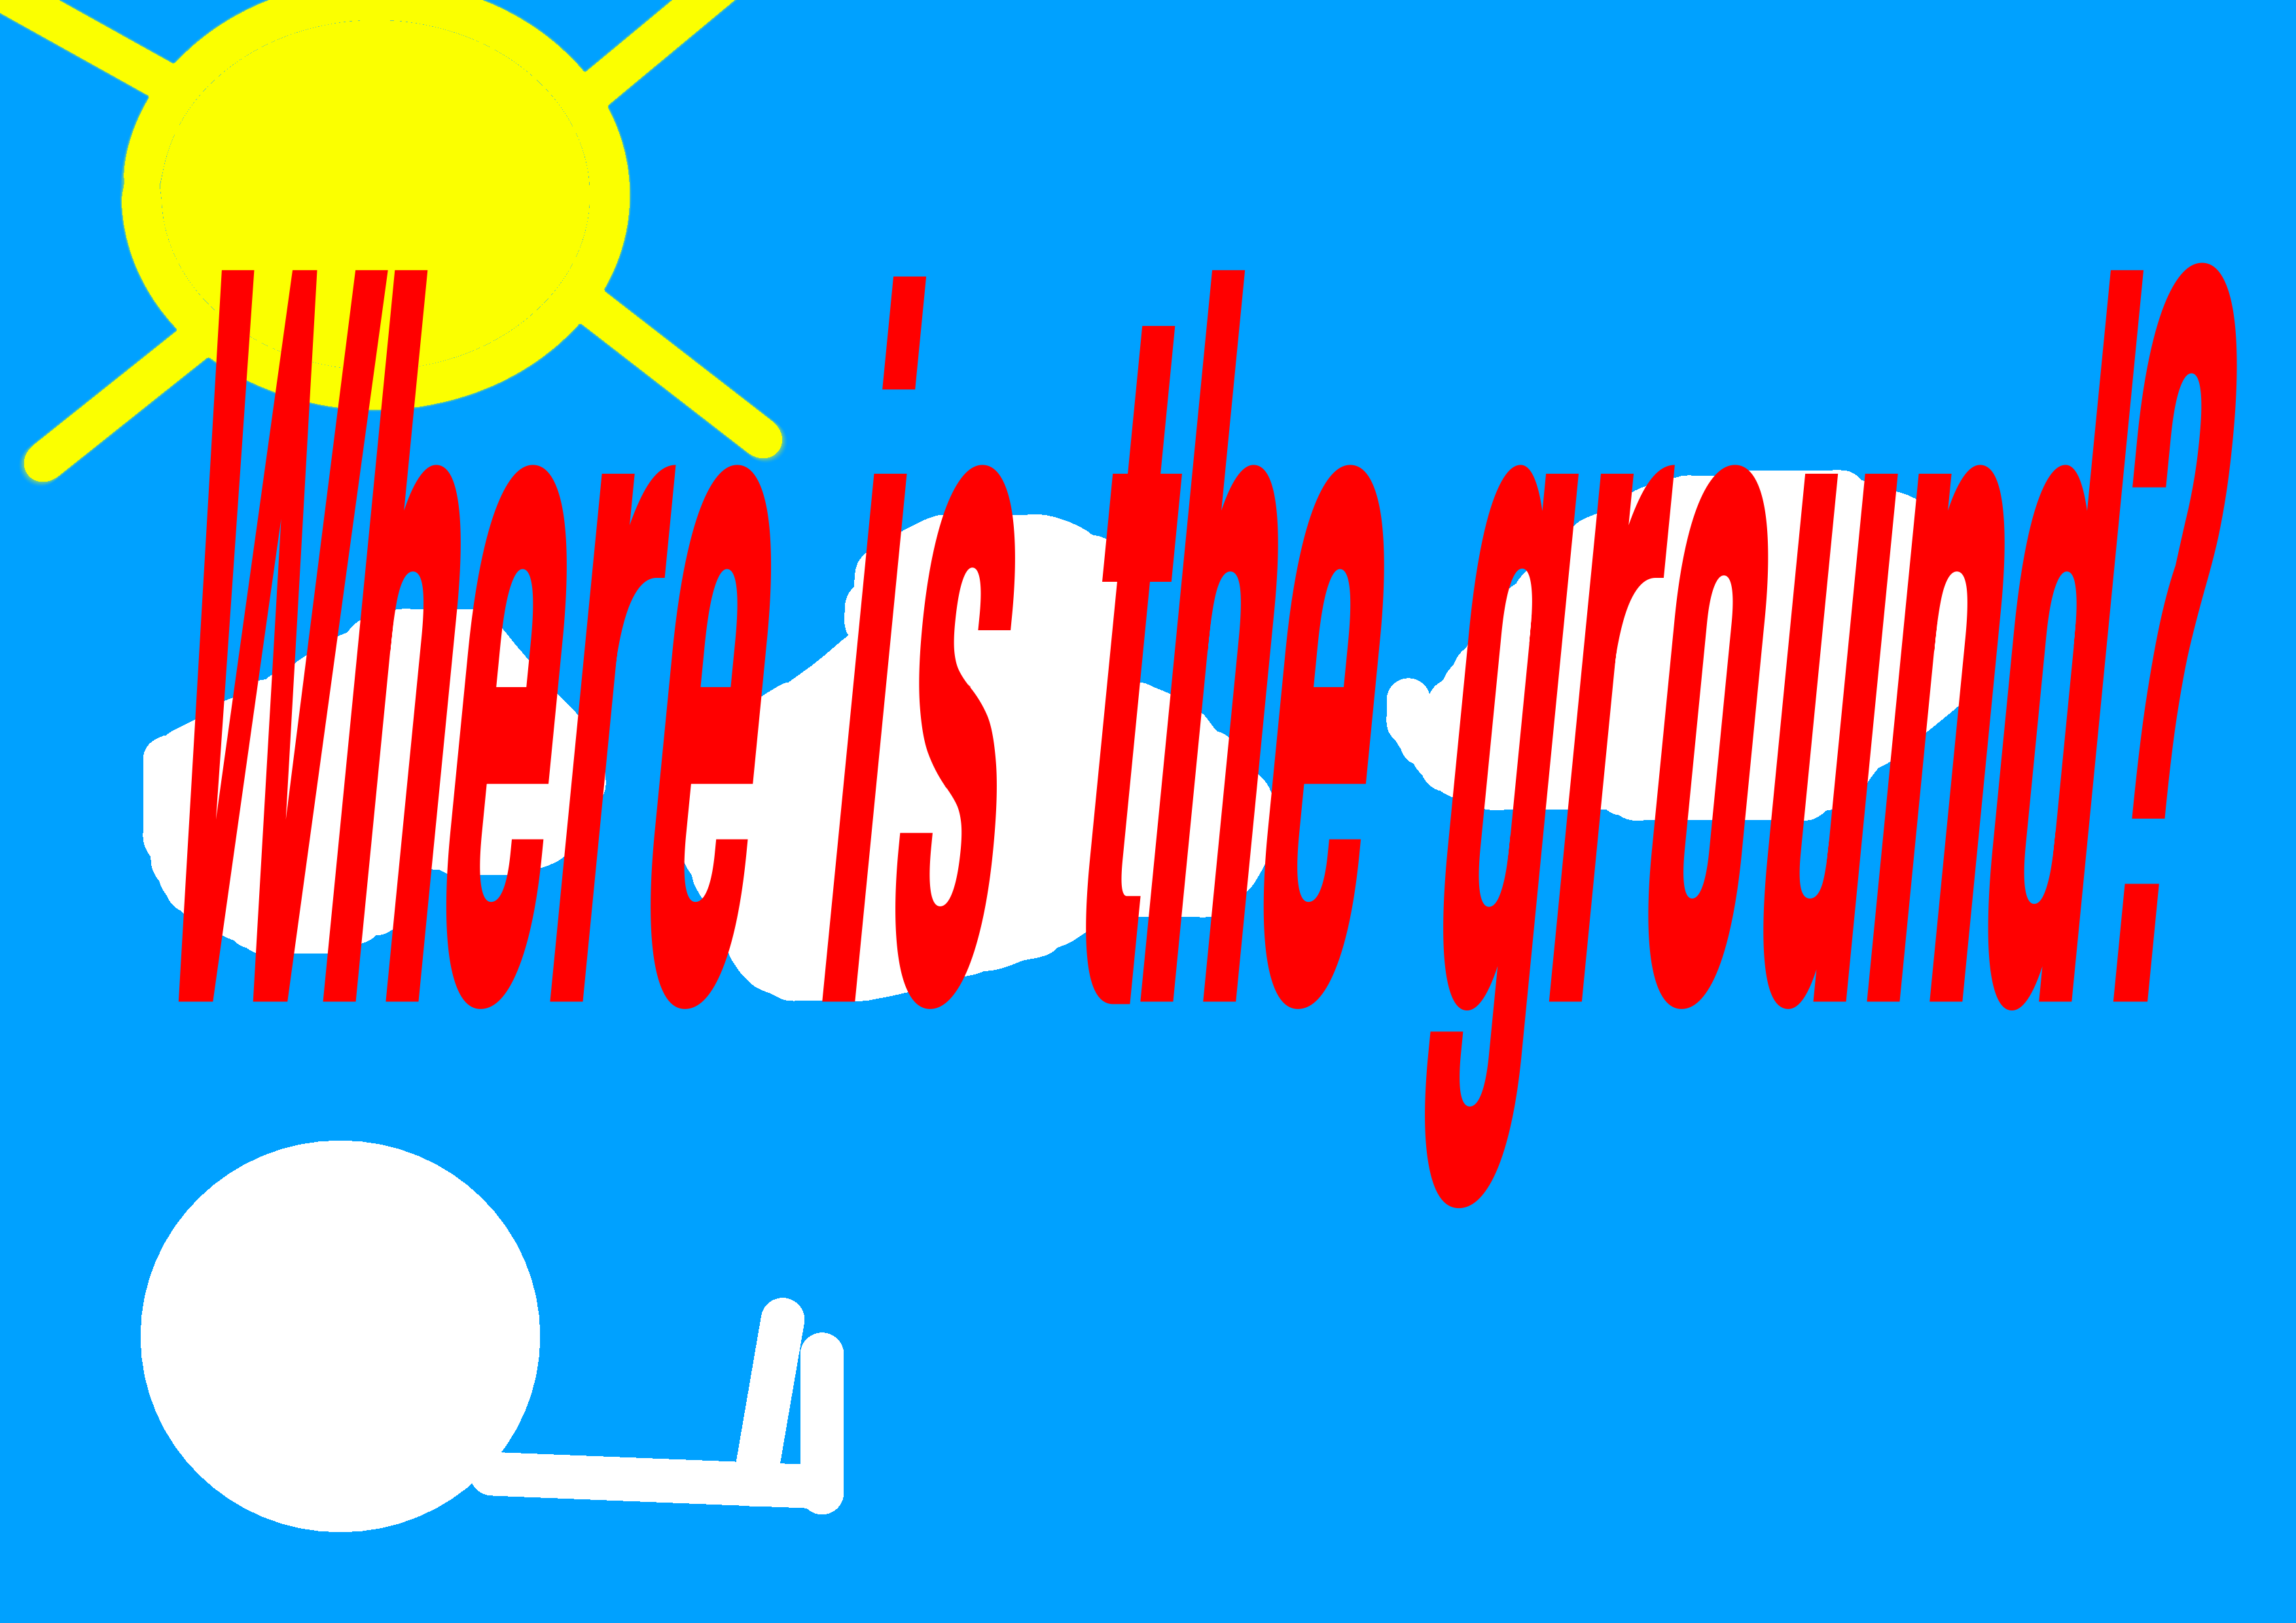 where is the ground?